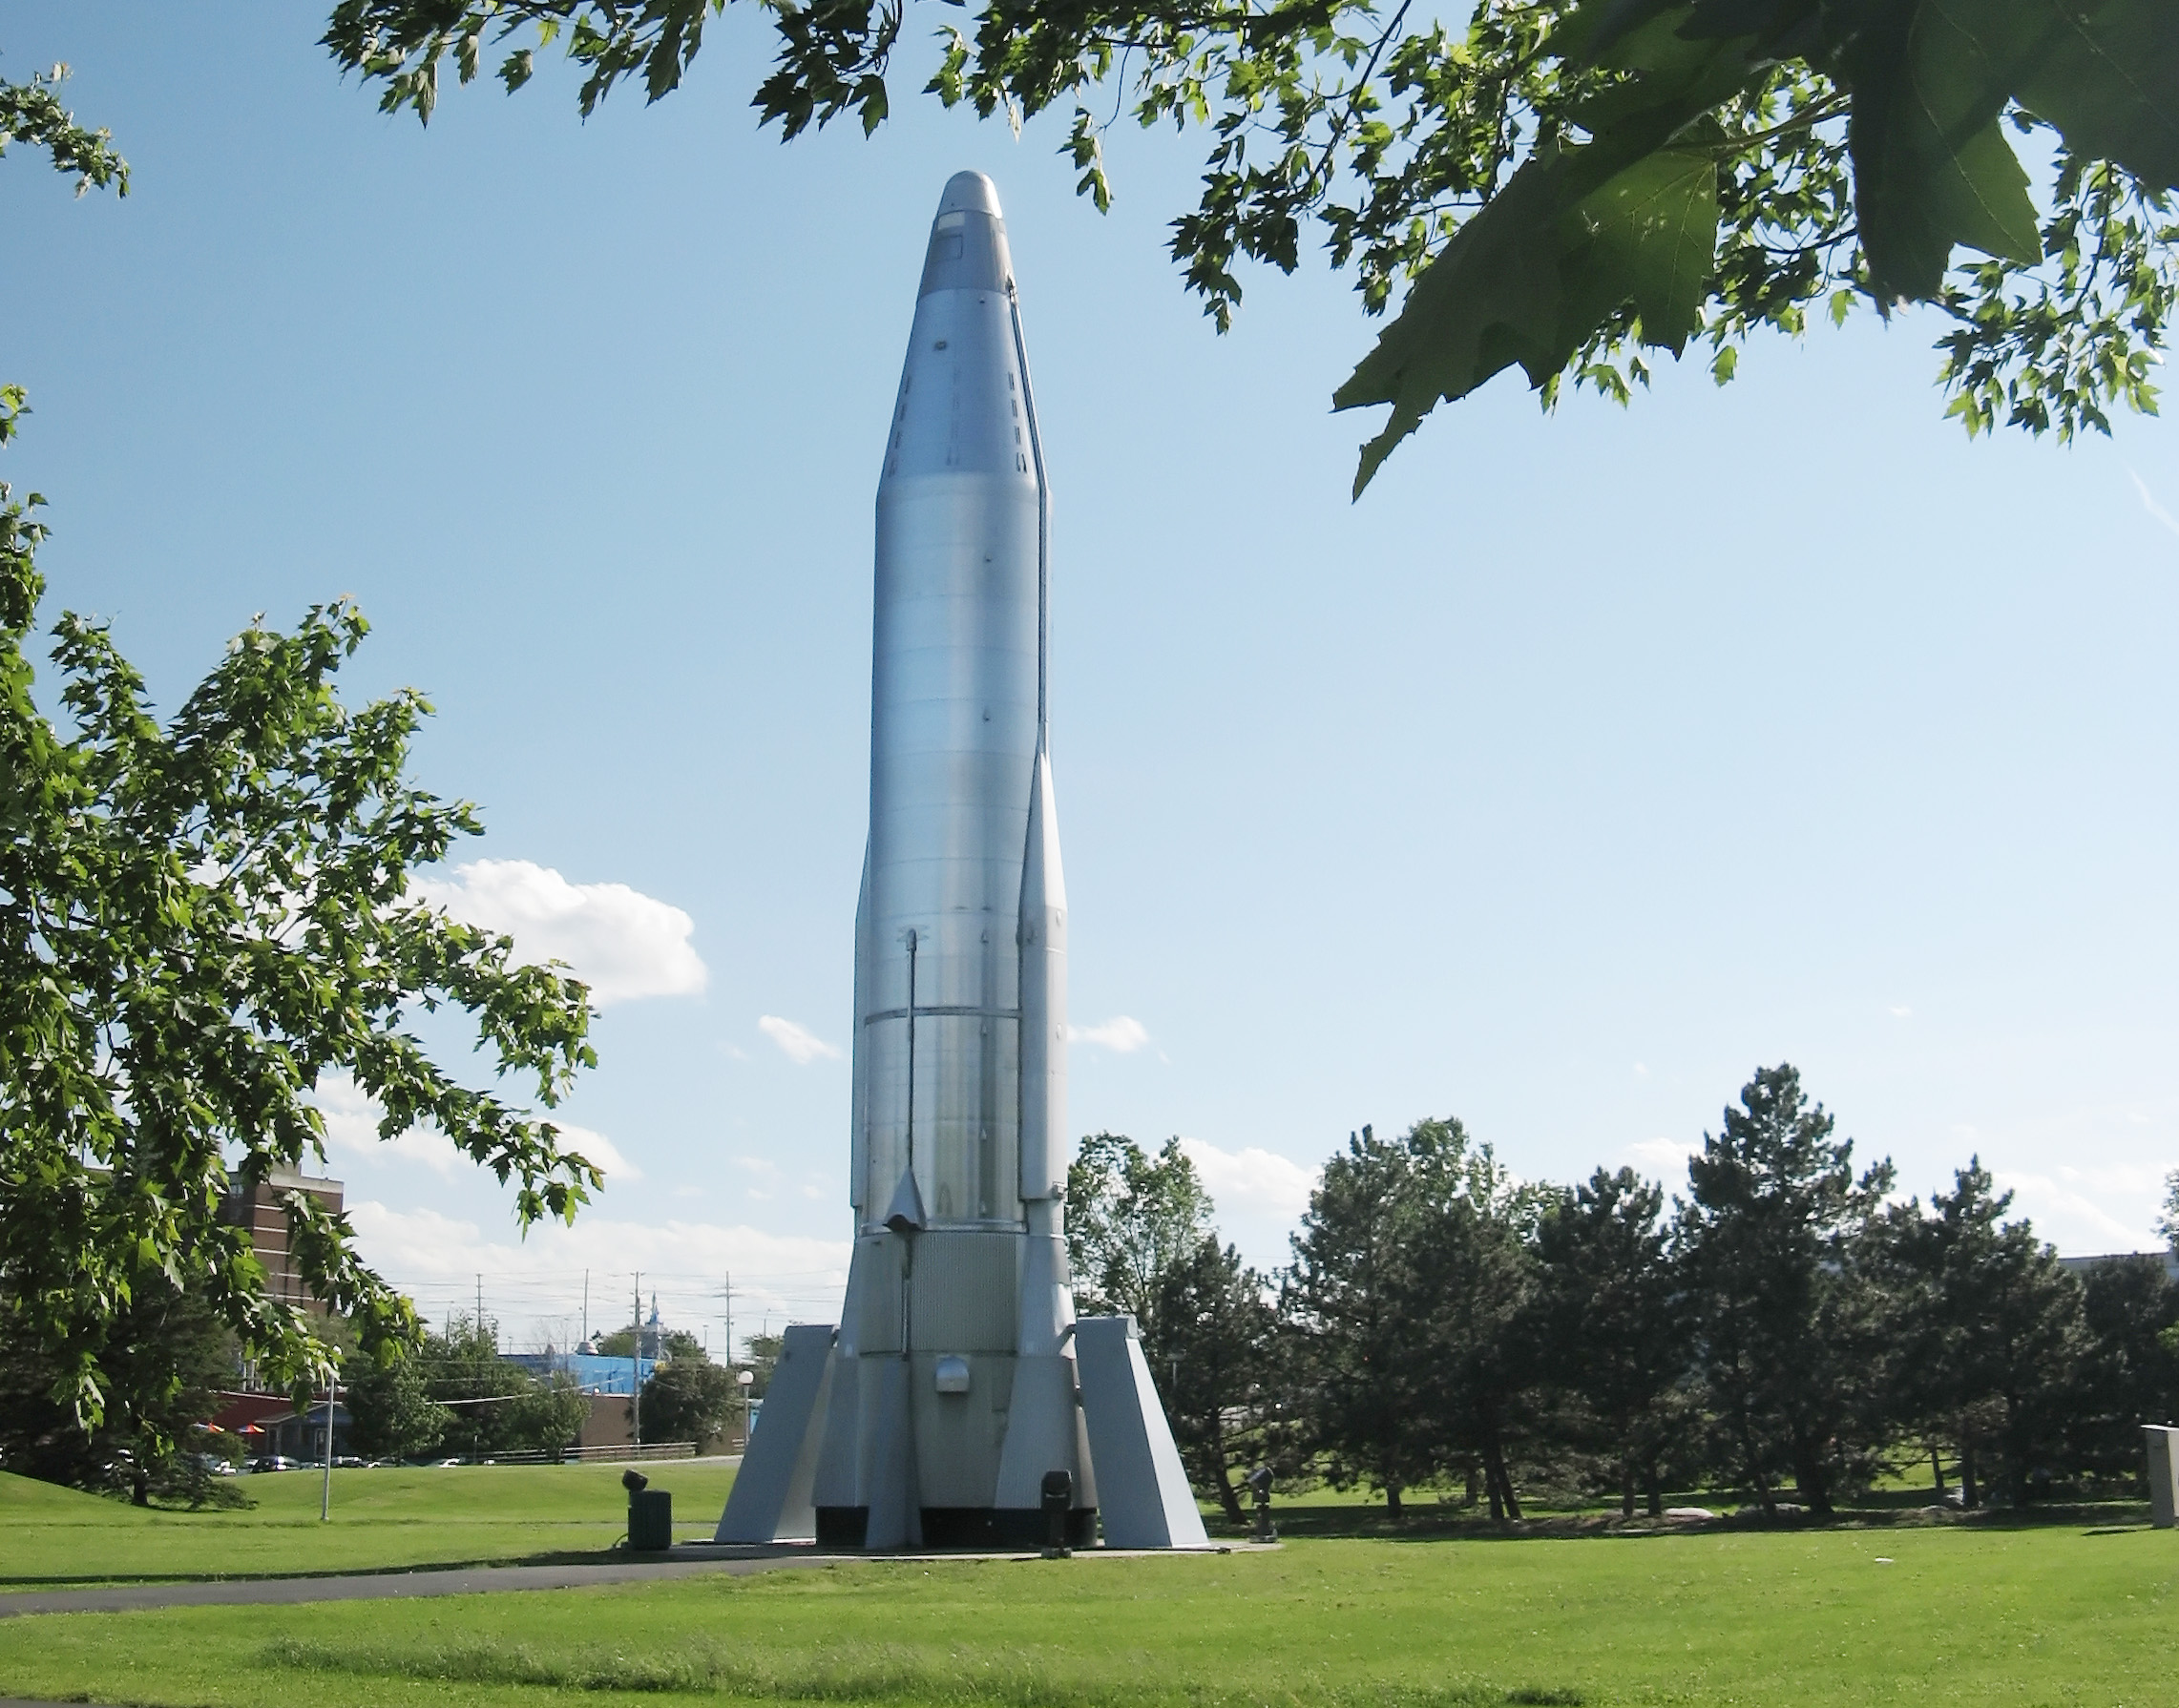 The Atlas 5A Rocket outside the Canada Museum of Science & Technology in Ottawa, Ontario. (photo by David Carroll - creative commons - link HERE)